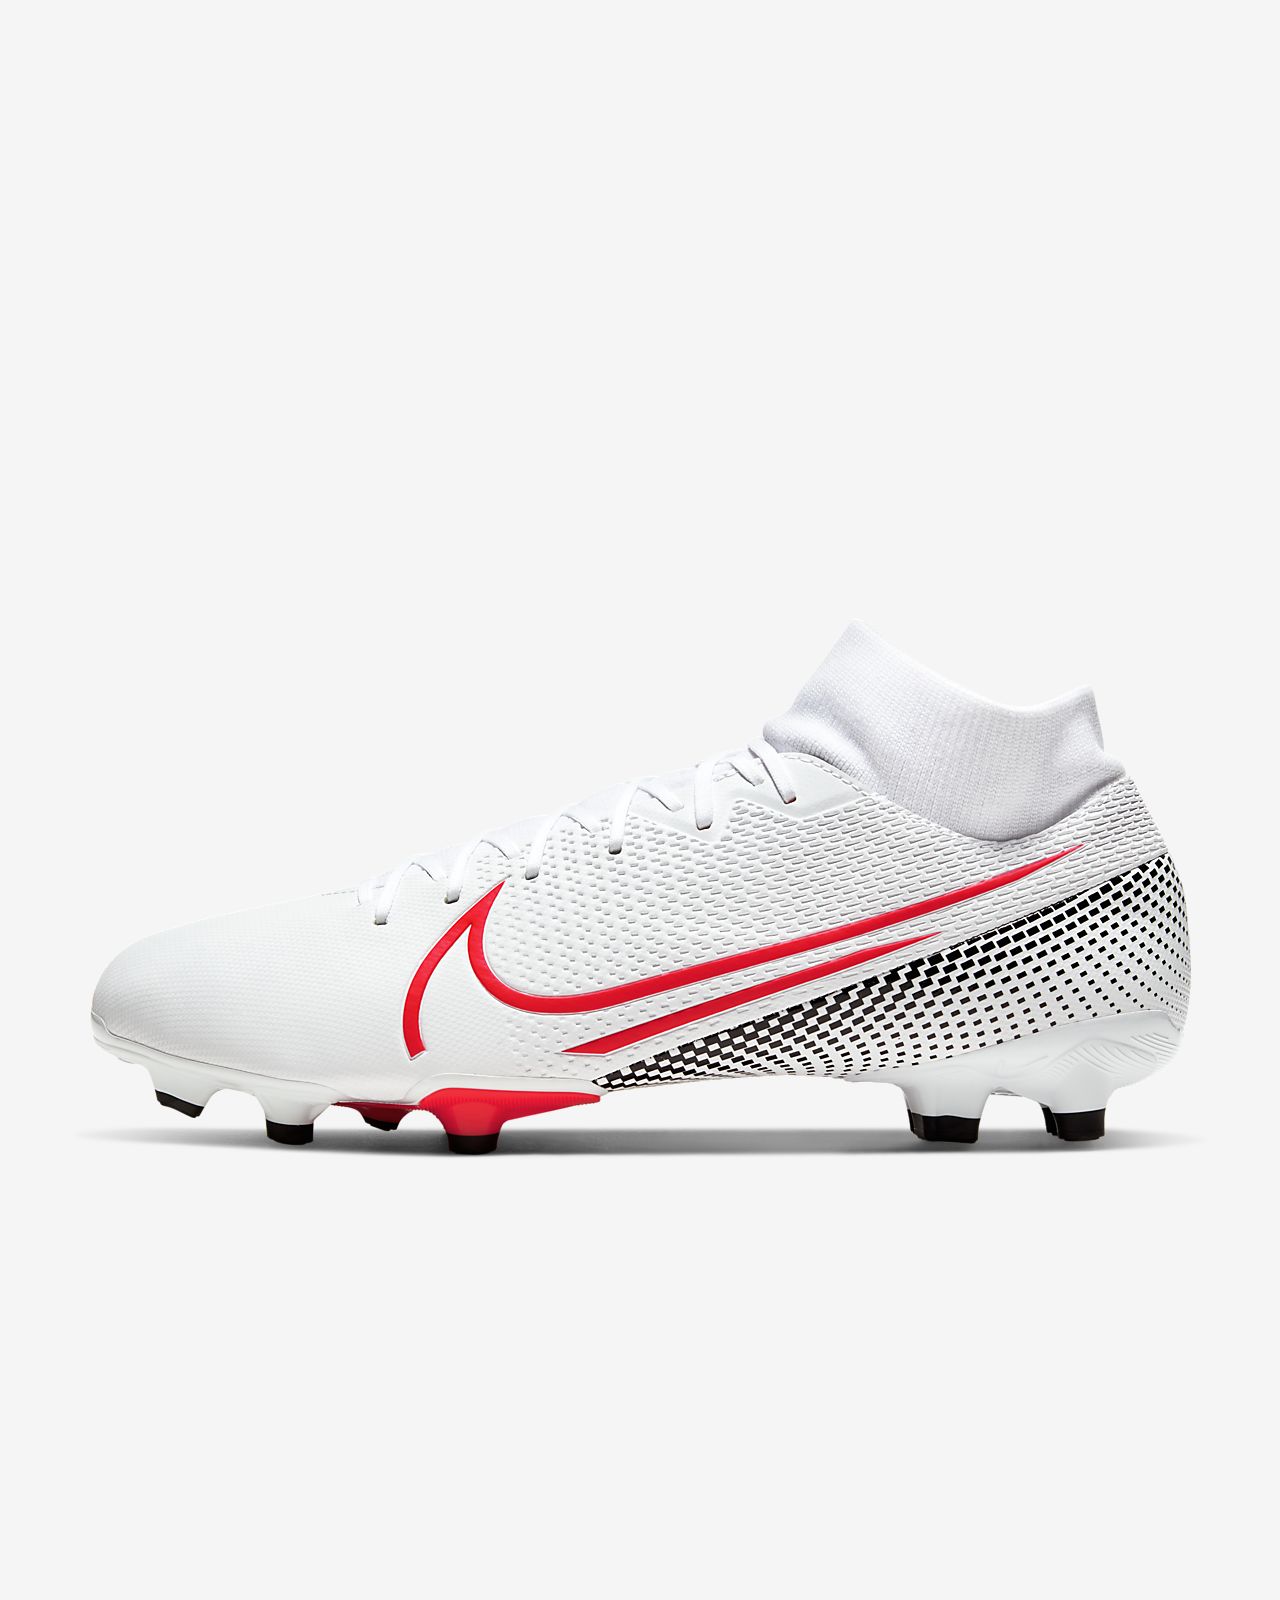 Nike Mercurial Superfly 7 Academy MG Jr. from 41.95.